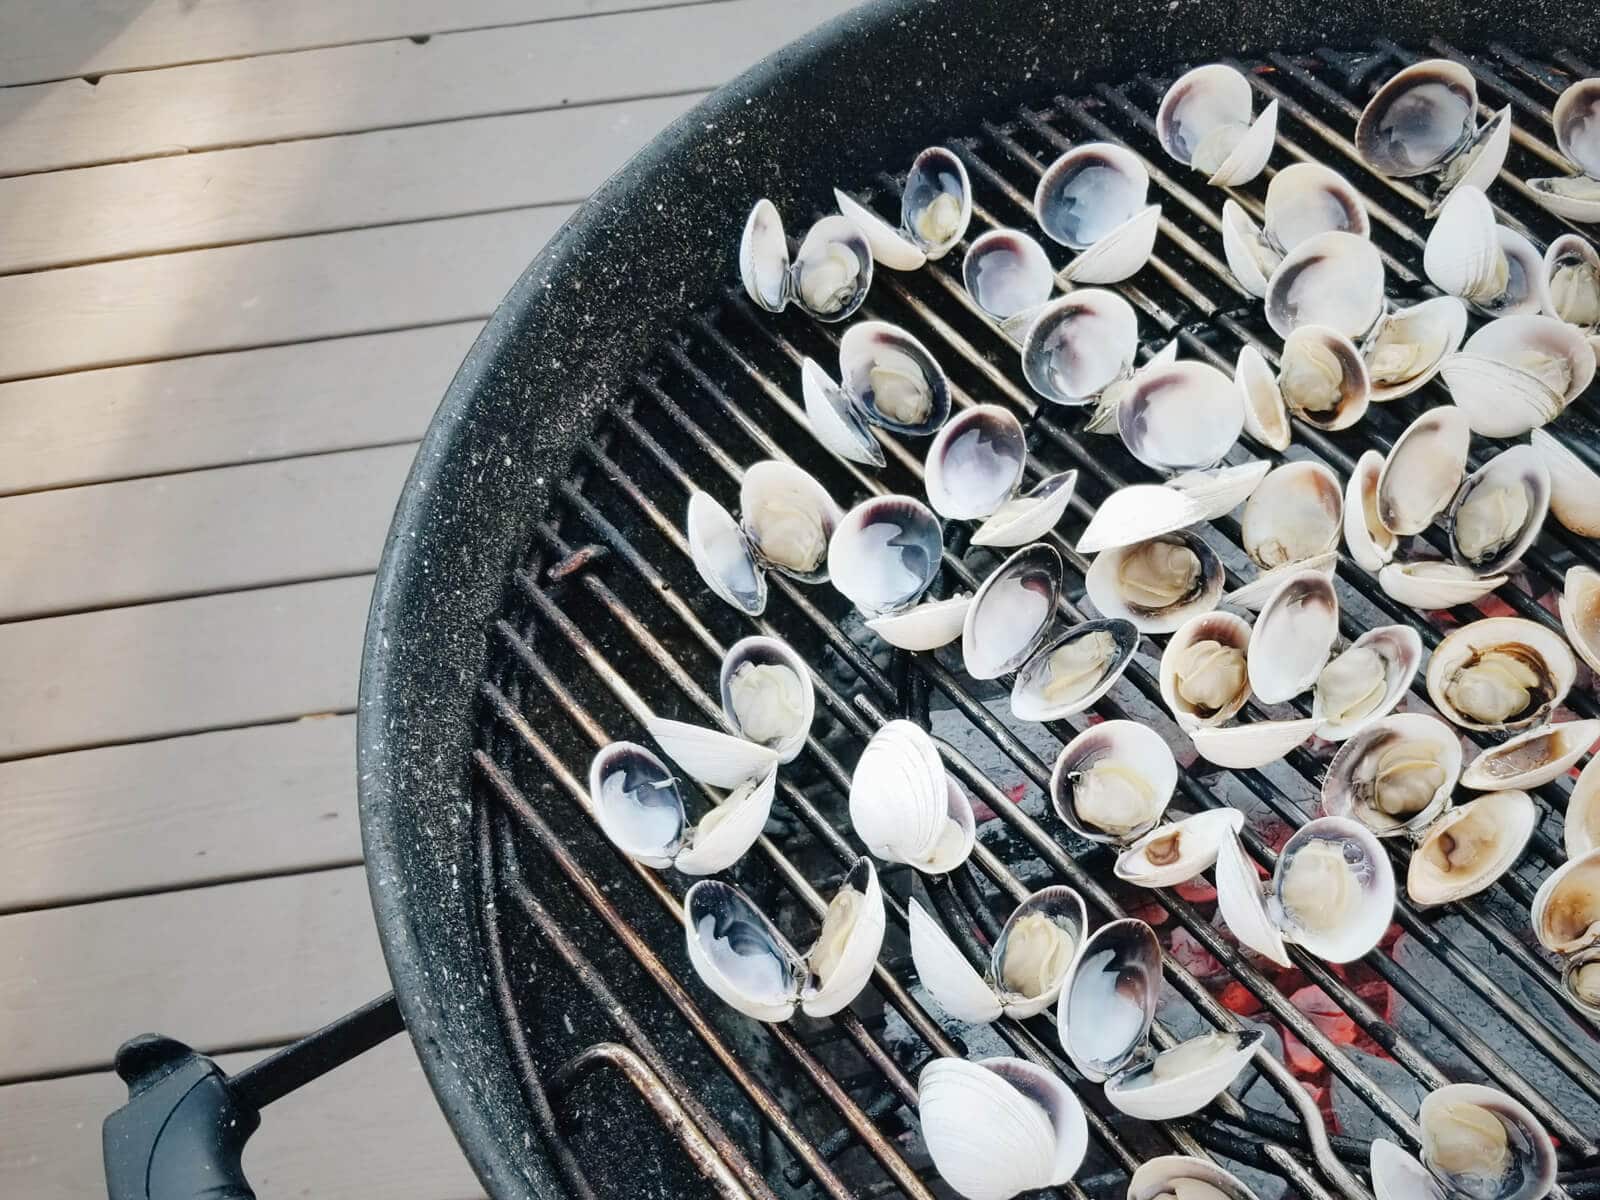 Clams on the grill